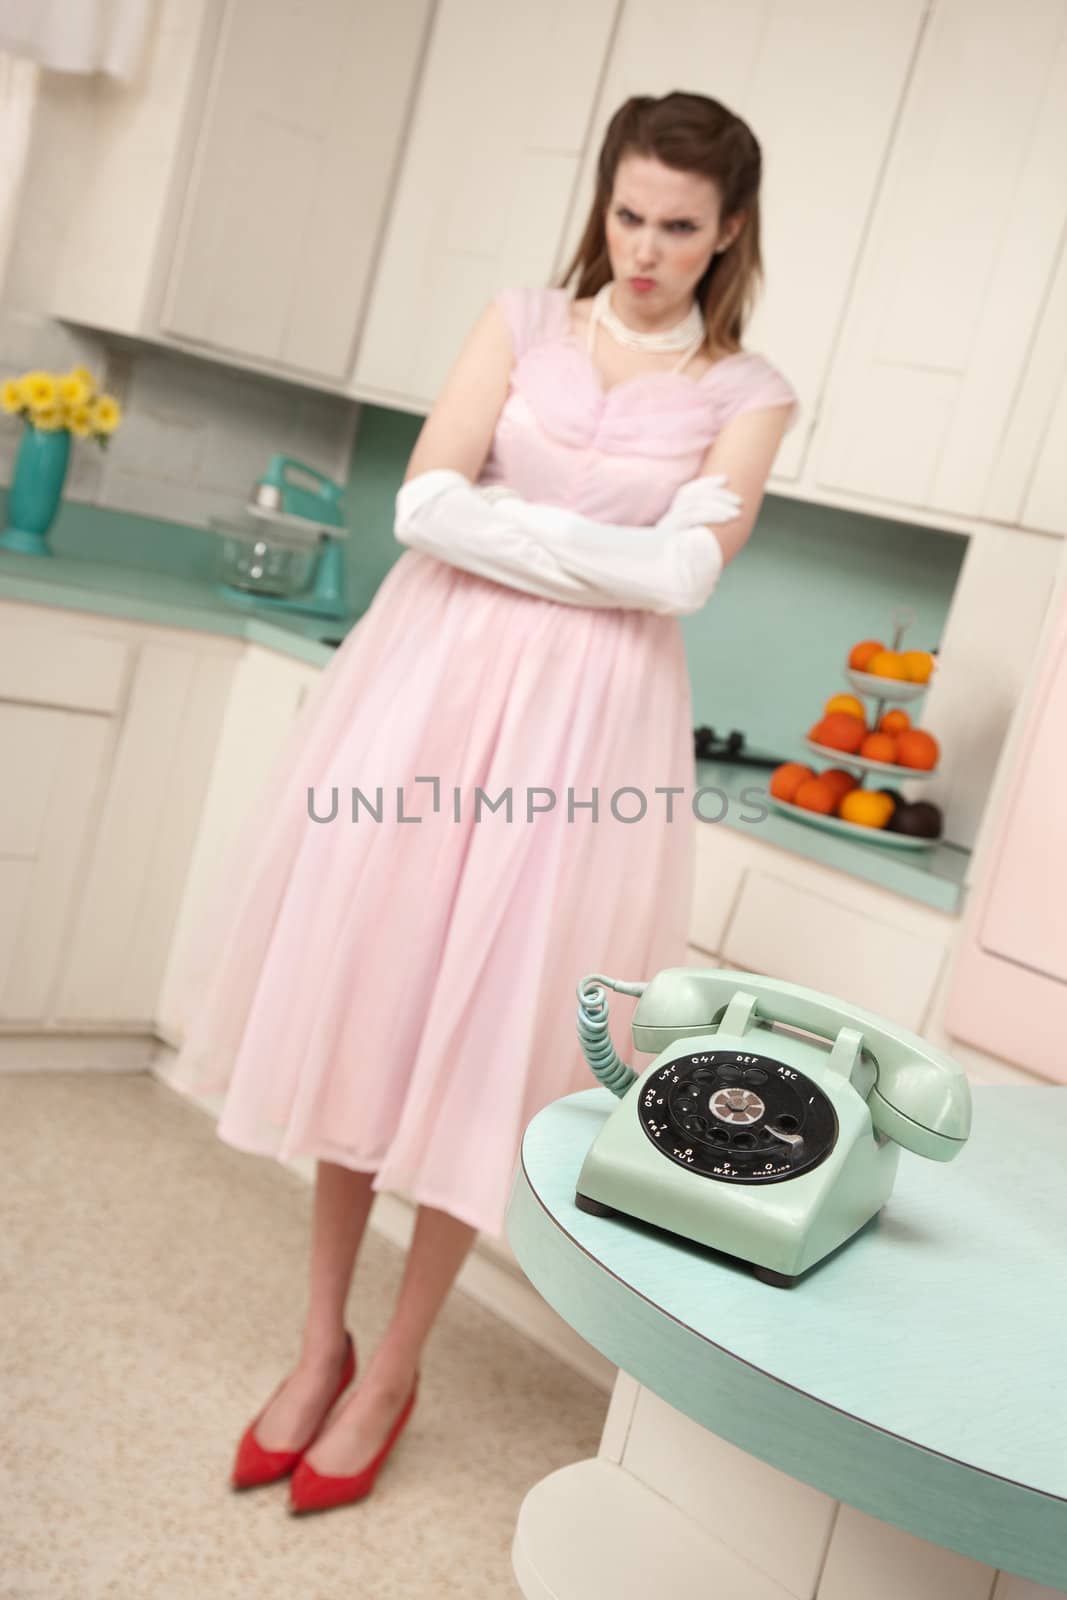 Unhappy cute young woman bride waiting by telephone